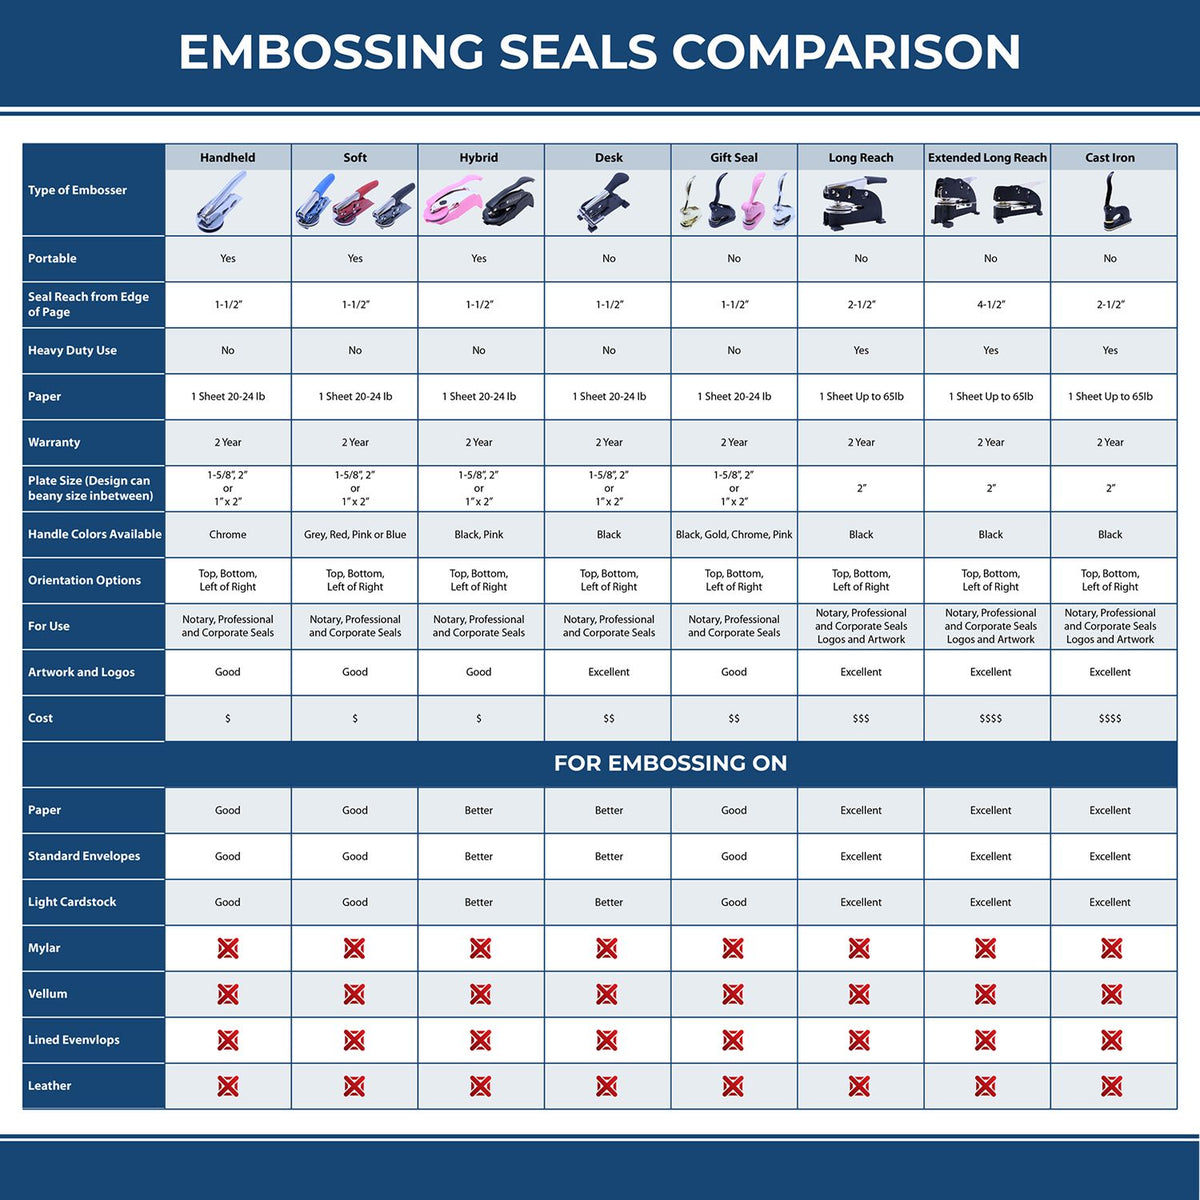 A comparison chart for the different types of mount models available for the Heavy Duty Cast Iron Maryland Geologist Seal Embosser